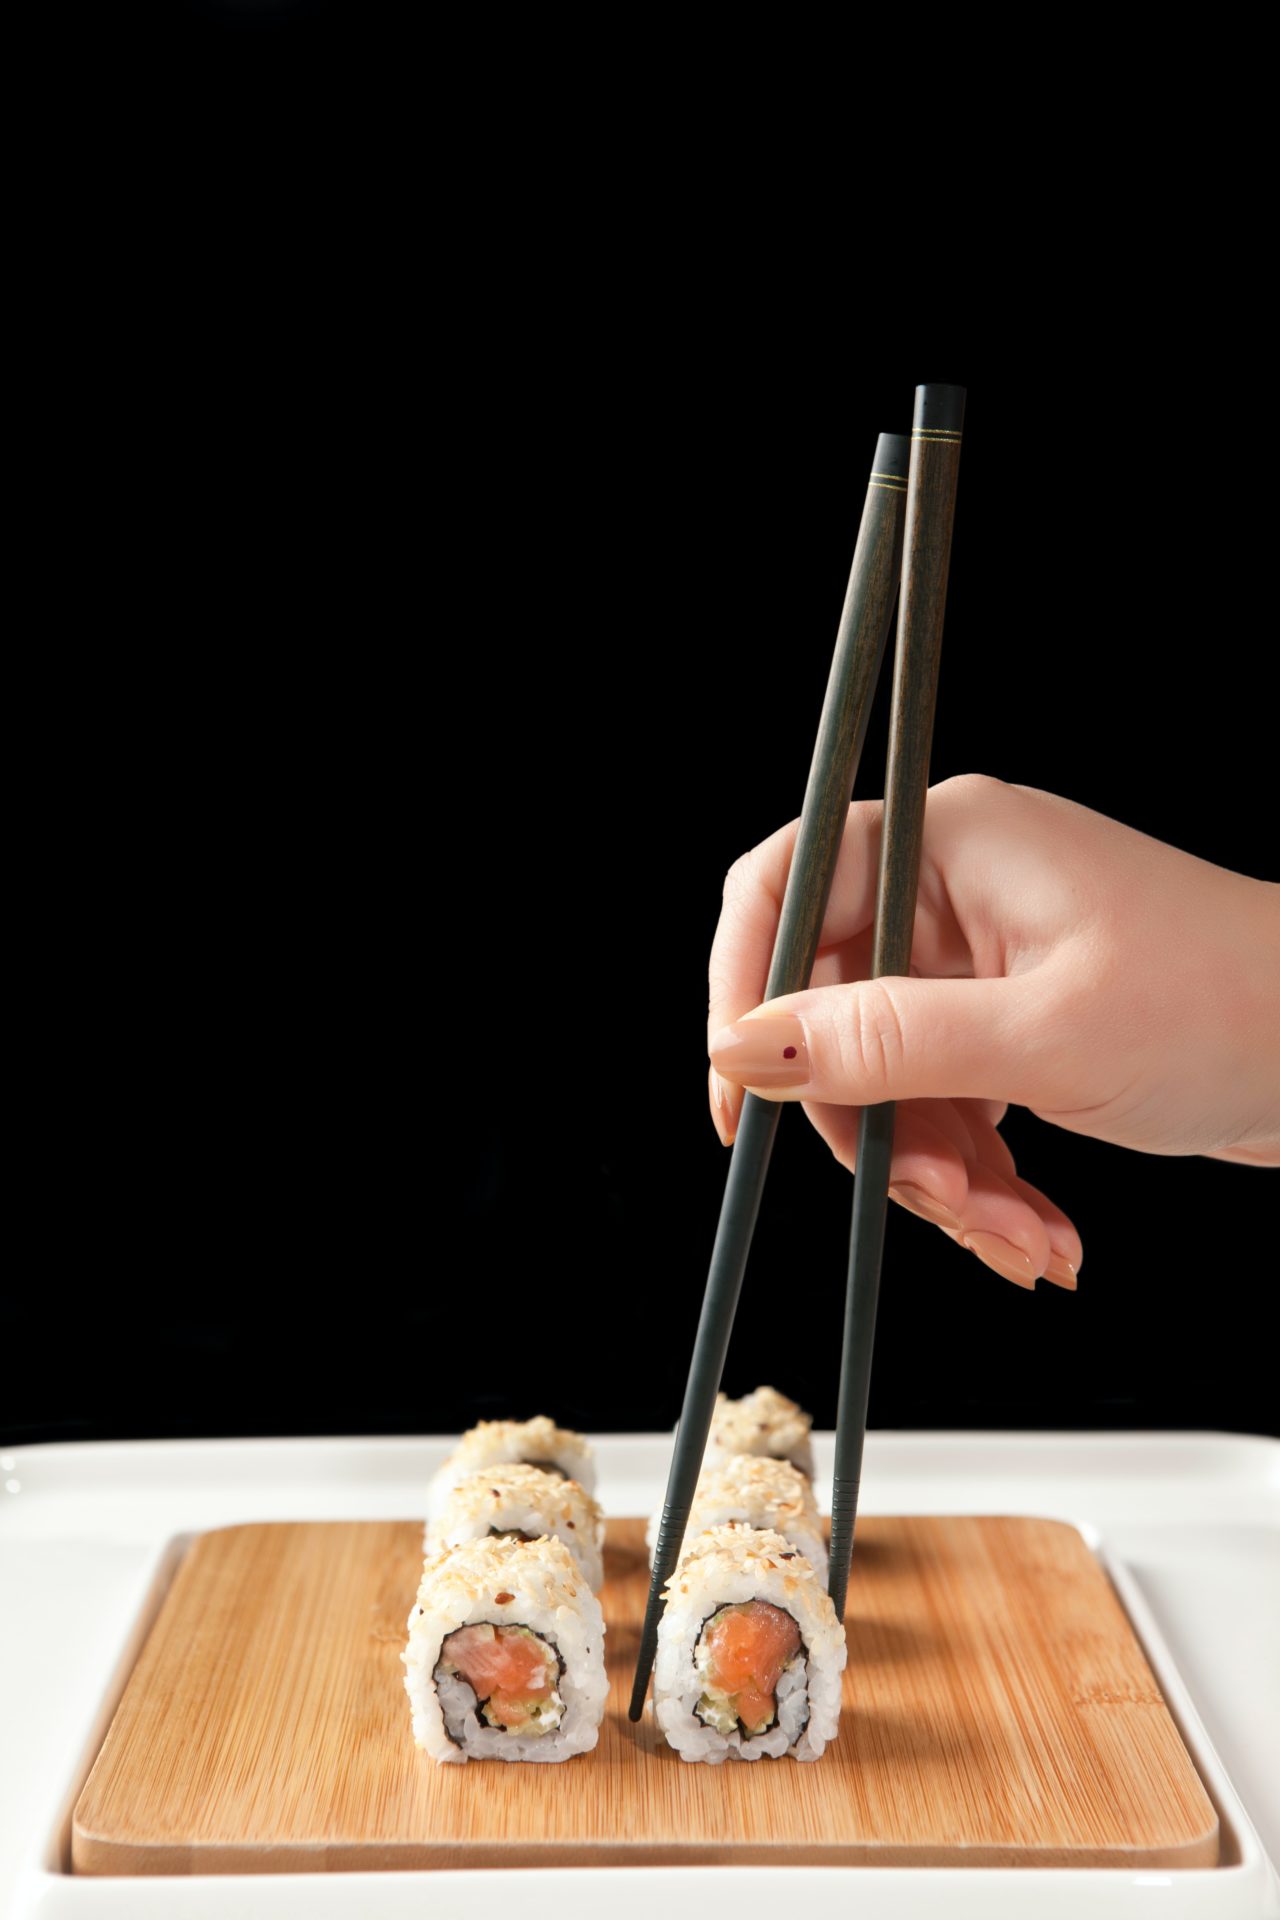 ‘Insects the new sushi’: Ÿnsect sees Japan and Korea as attractive markets for mealworm protein